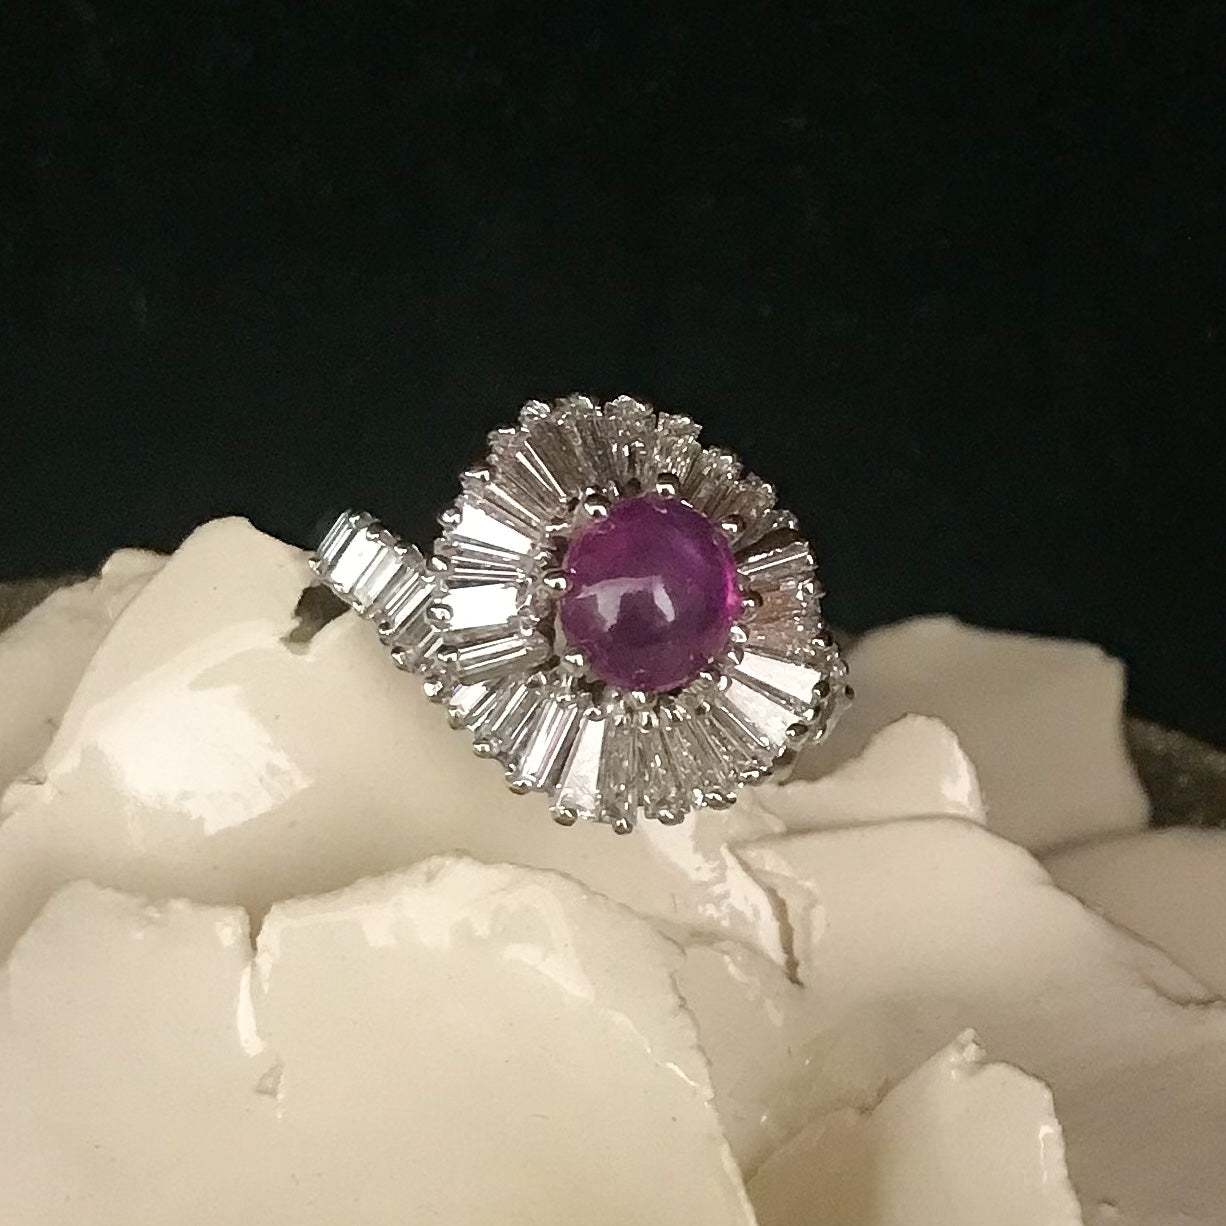 14Kt White Gold Ballerina Style Ring with Cabachon Ruby